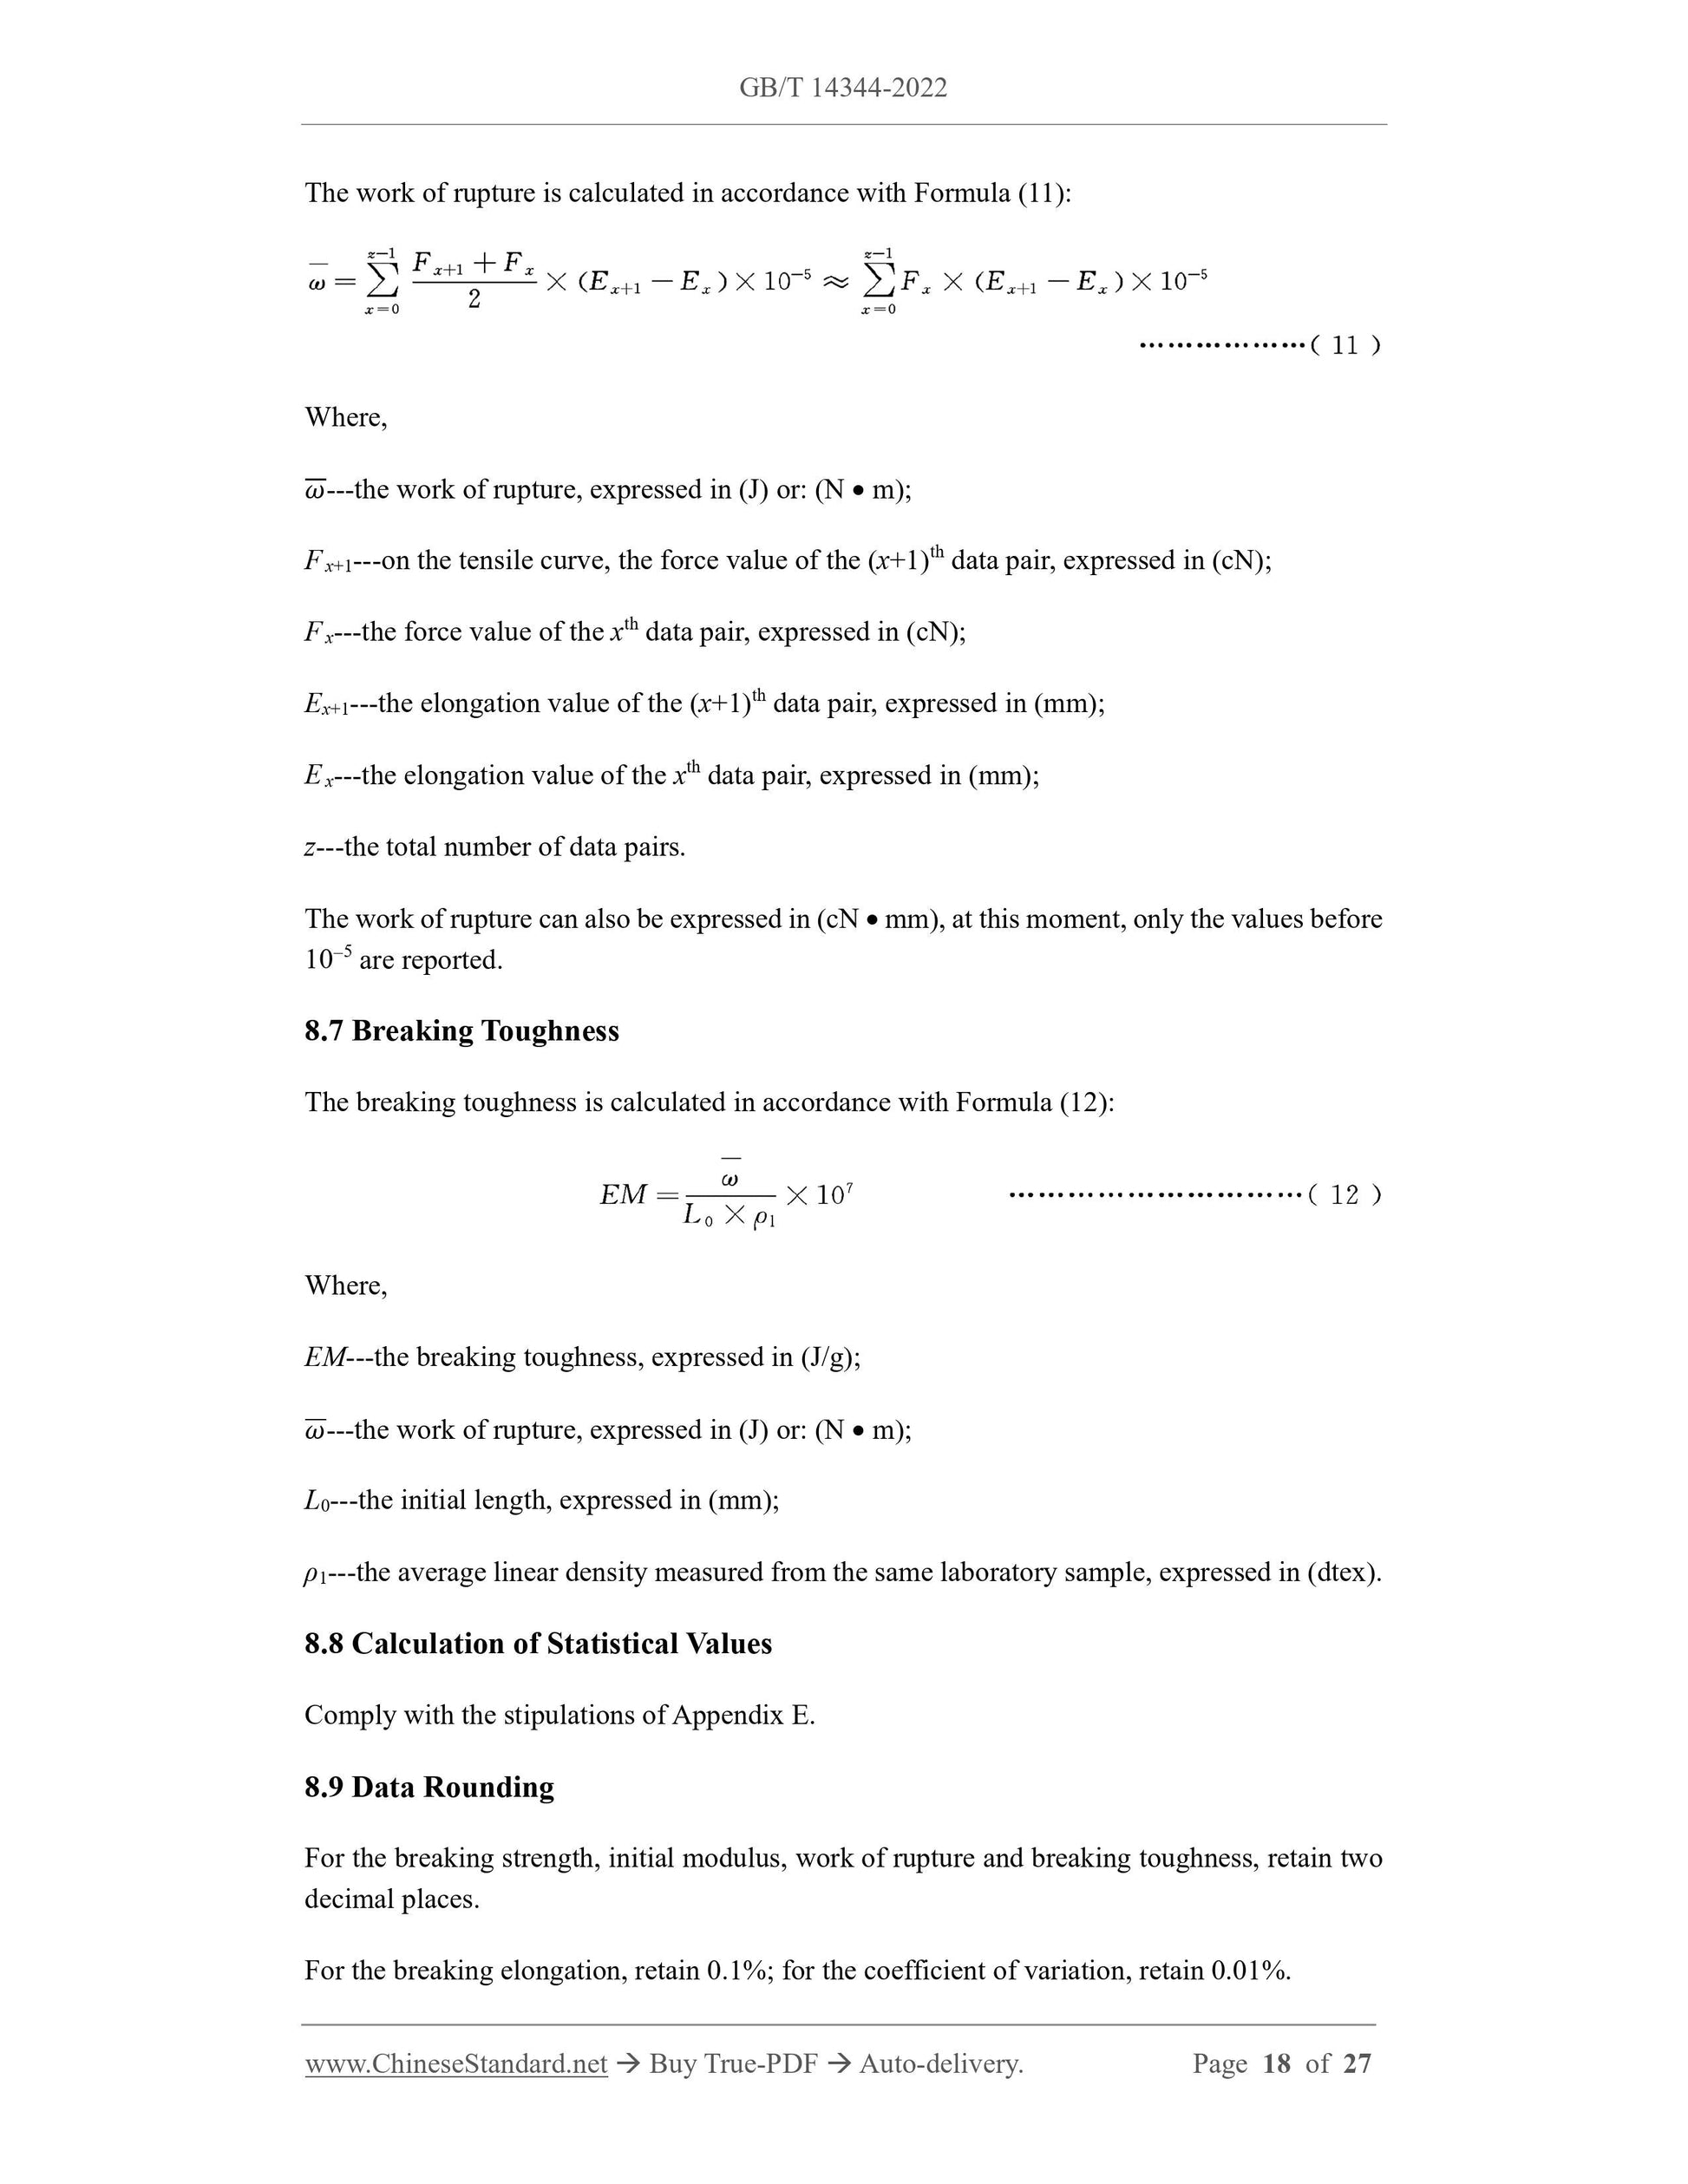 GB/T 14344-2022 Page 11